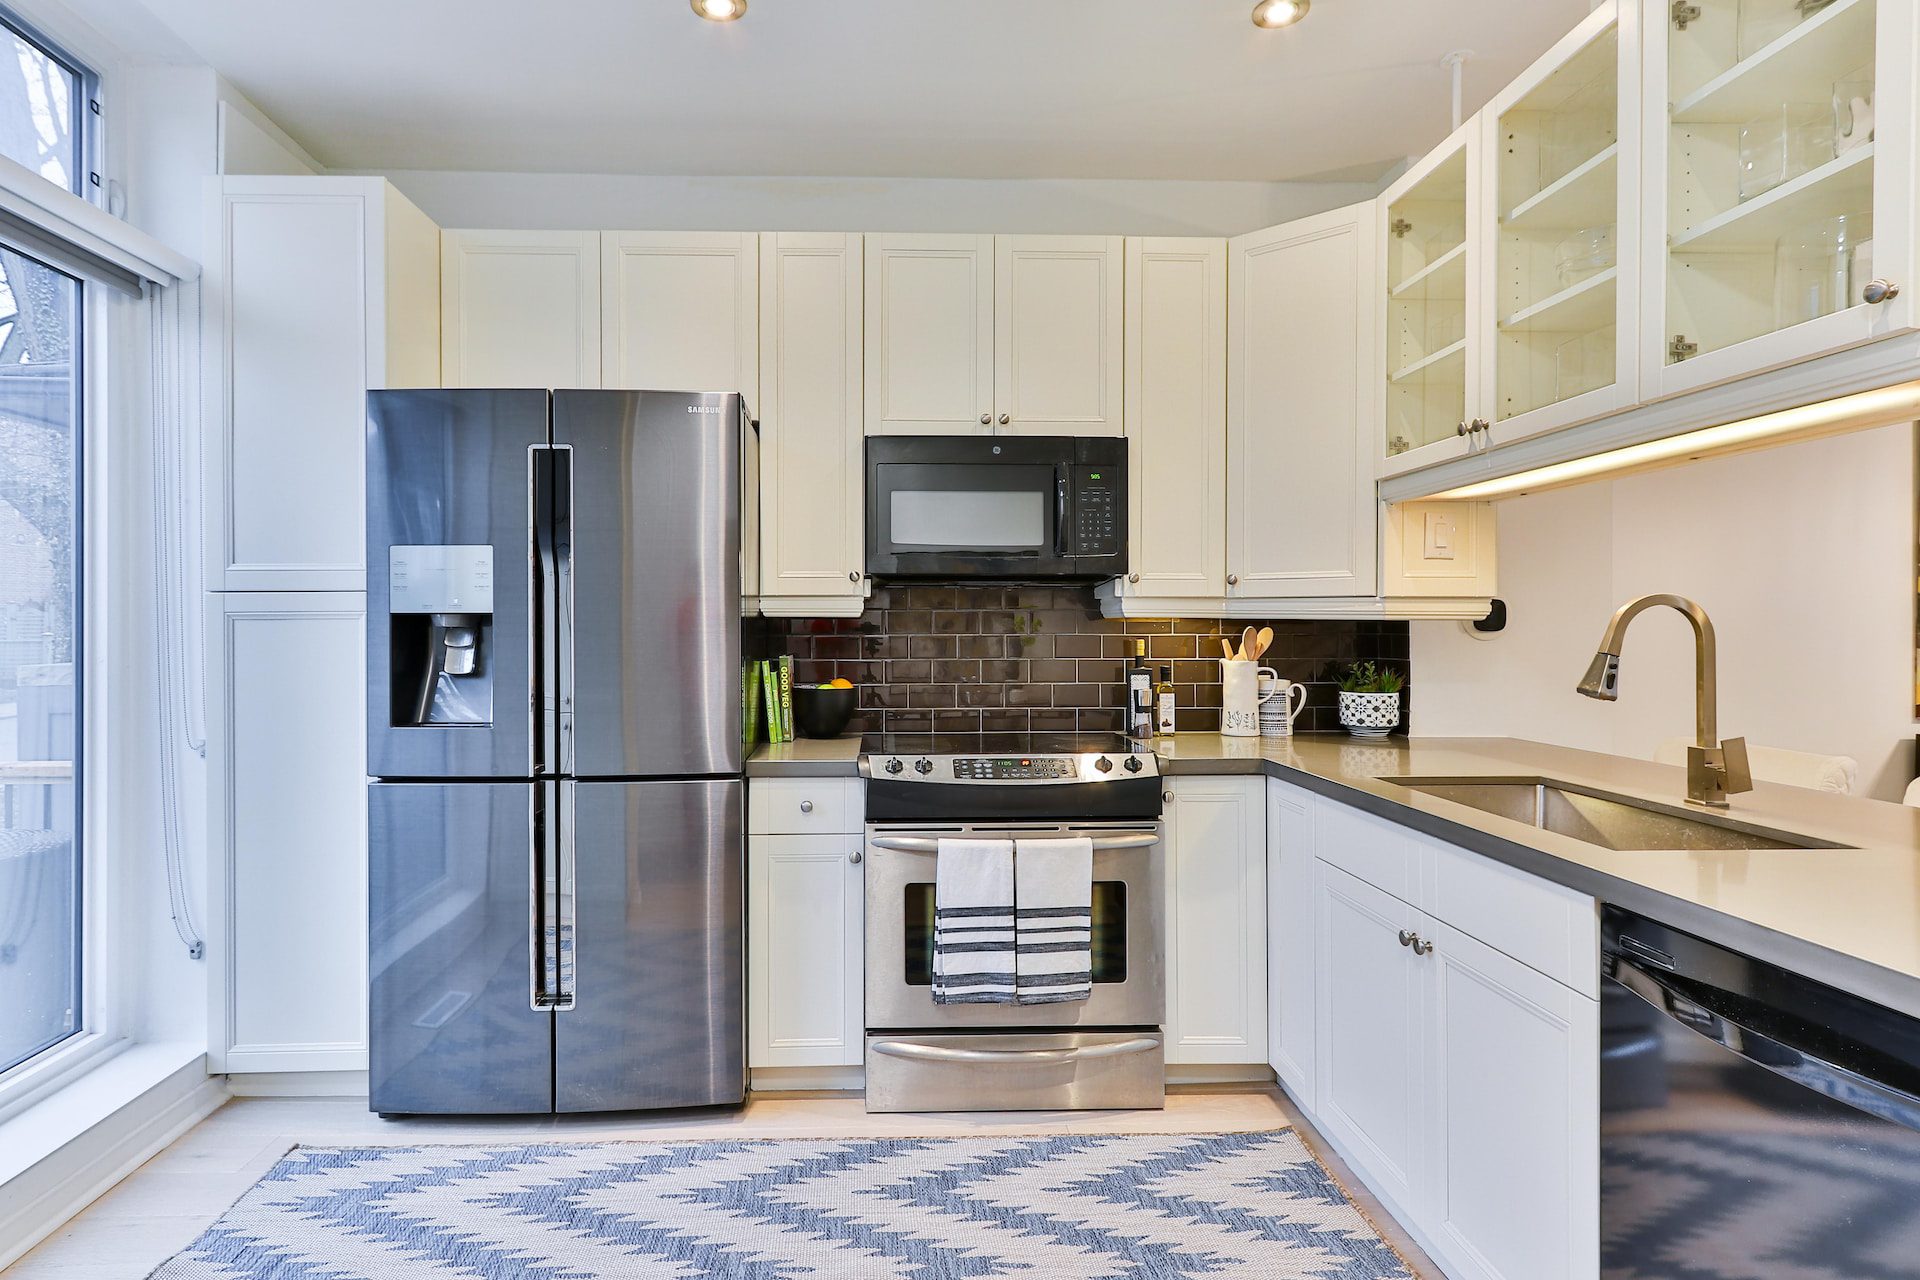 The 5 Most Important Basic Appliances for a Functional Kitchen